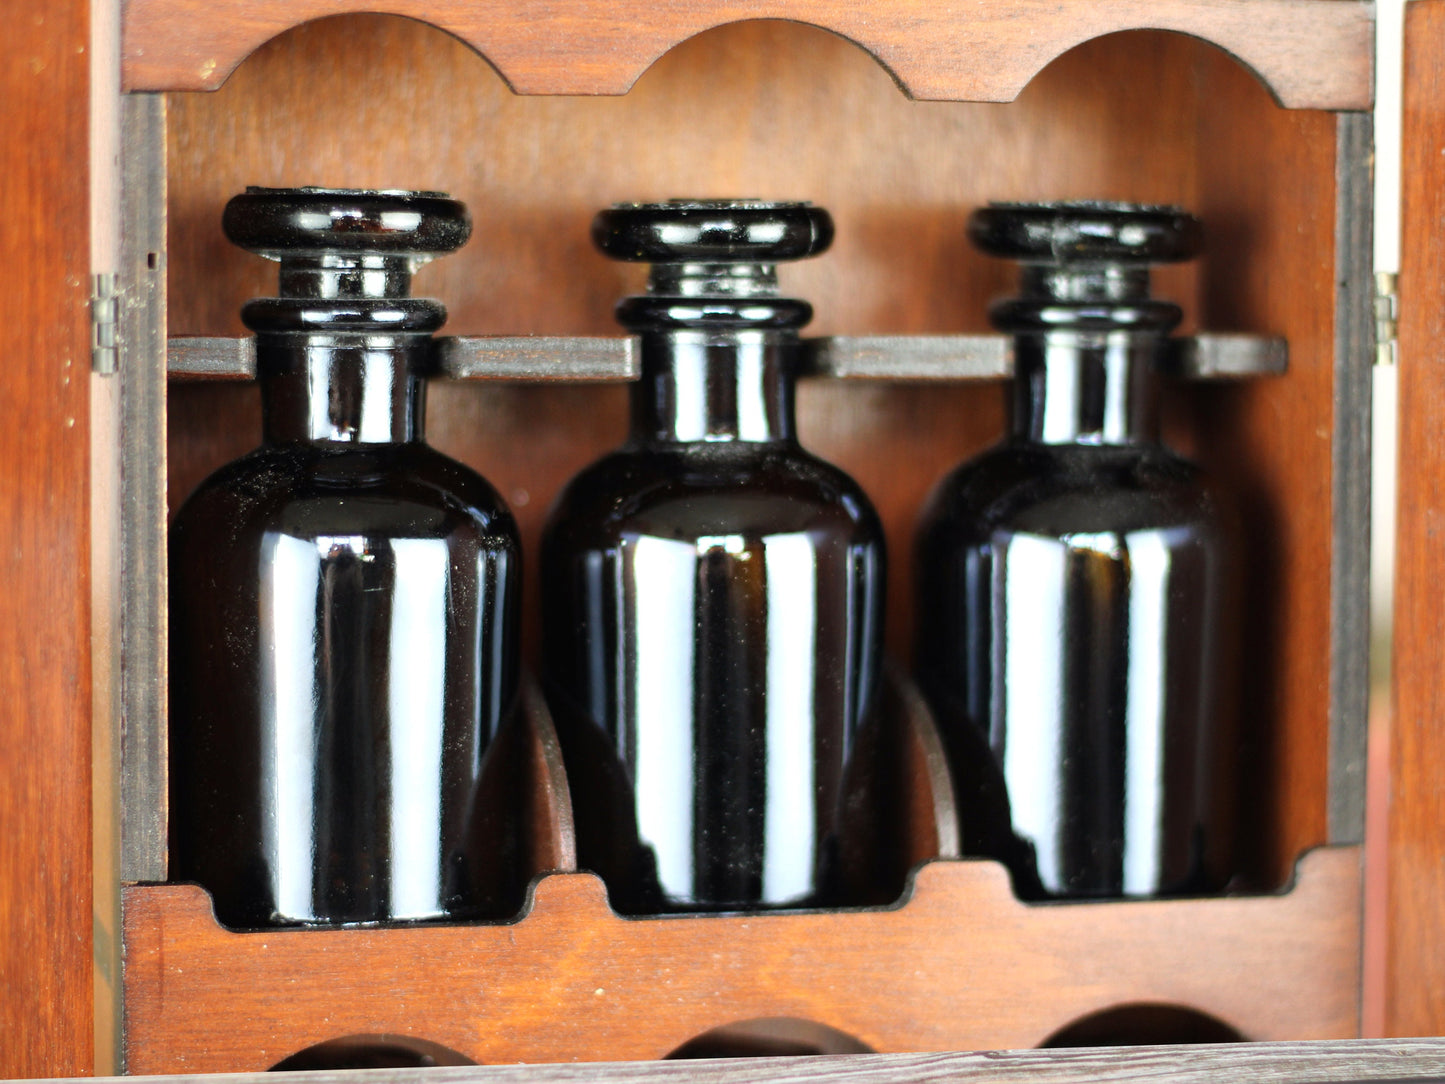 Wooden apothecary cabinet with slatted doors, drawer and 6 brown medicine bottles with glass stoppers